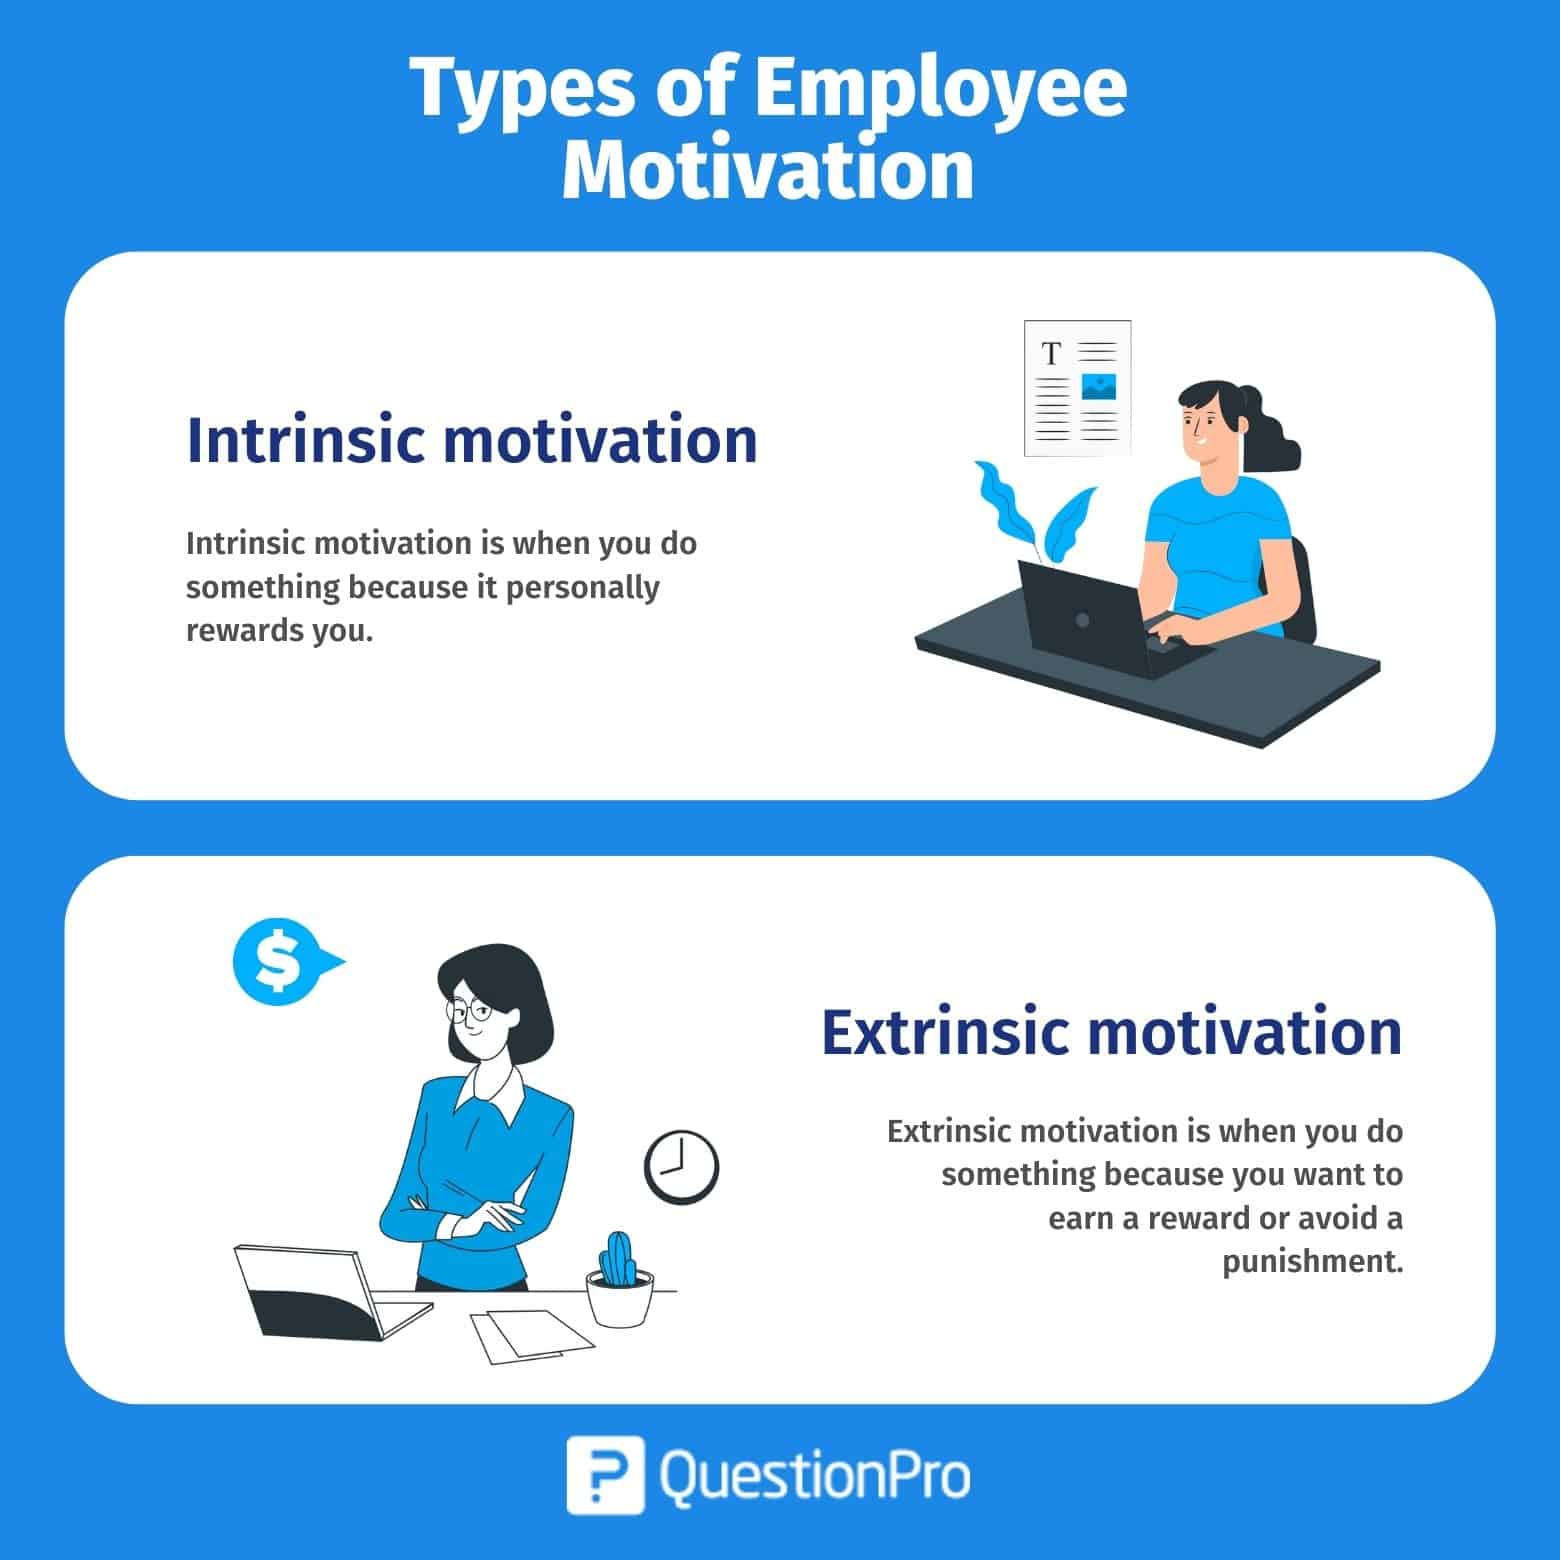 Employee Motivation: The Complete Guide | Questionpro